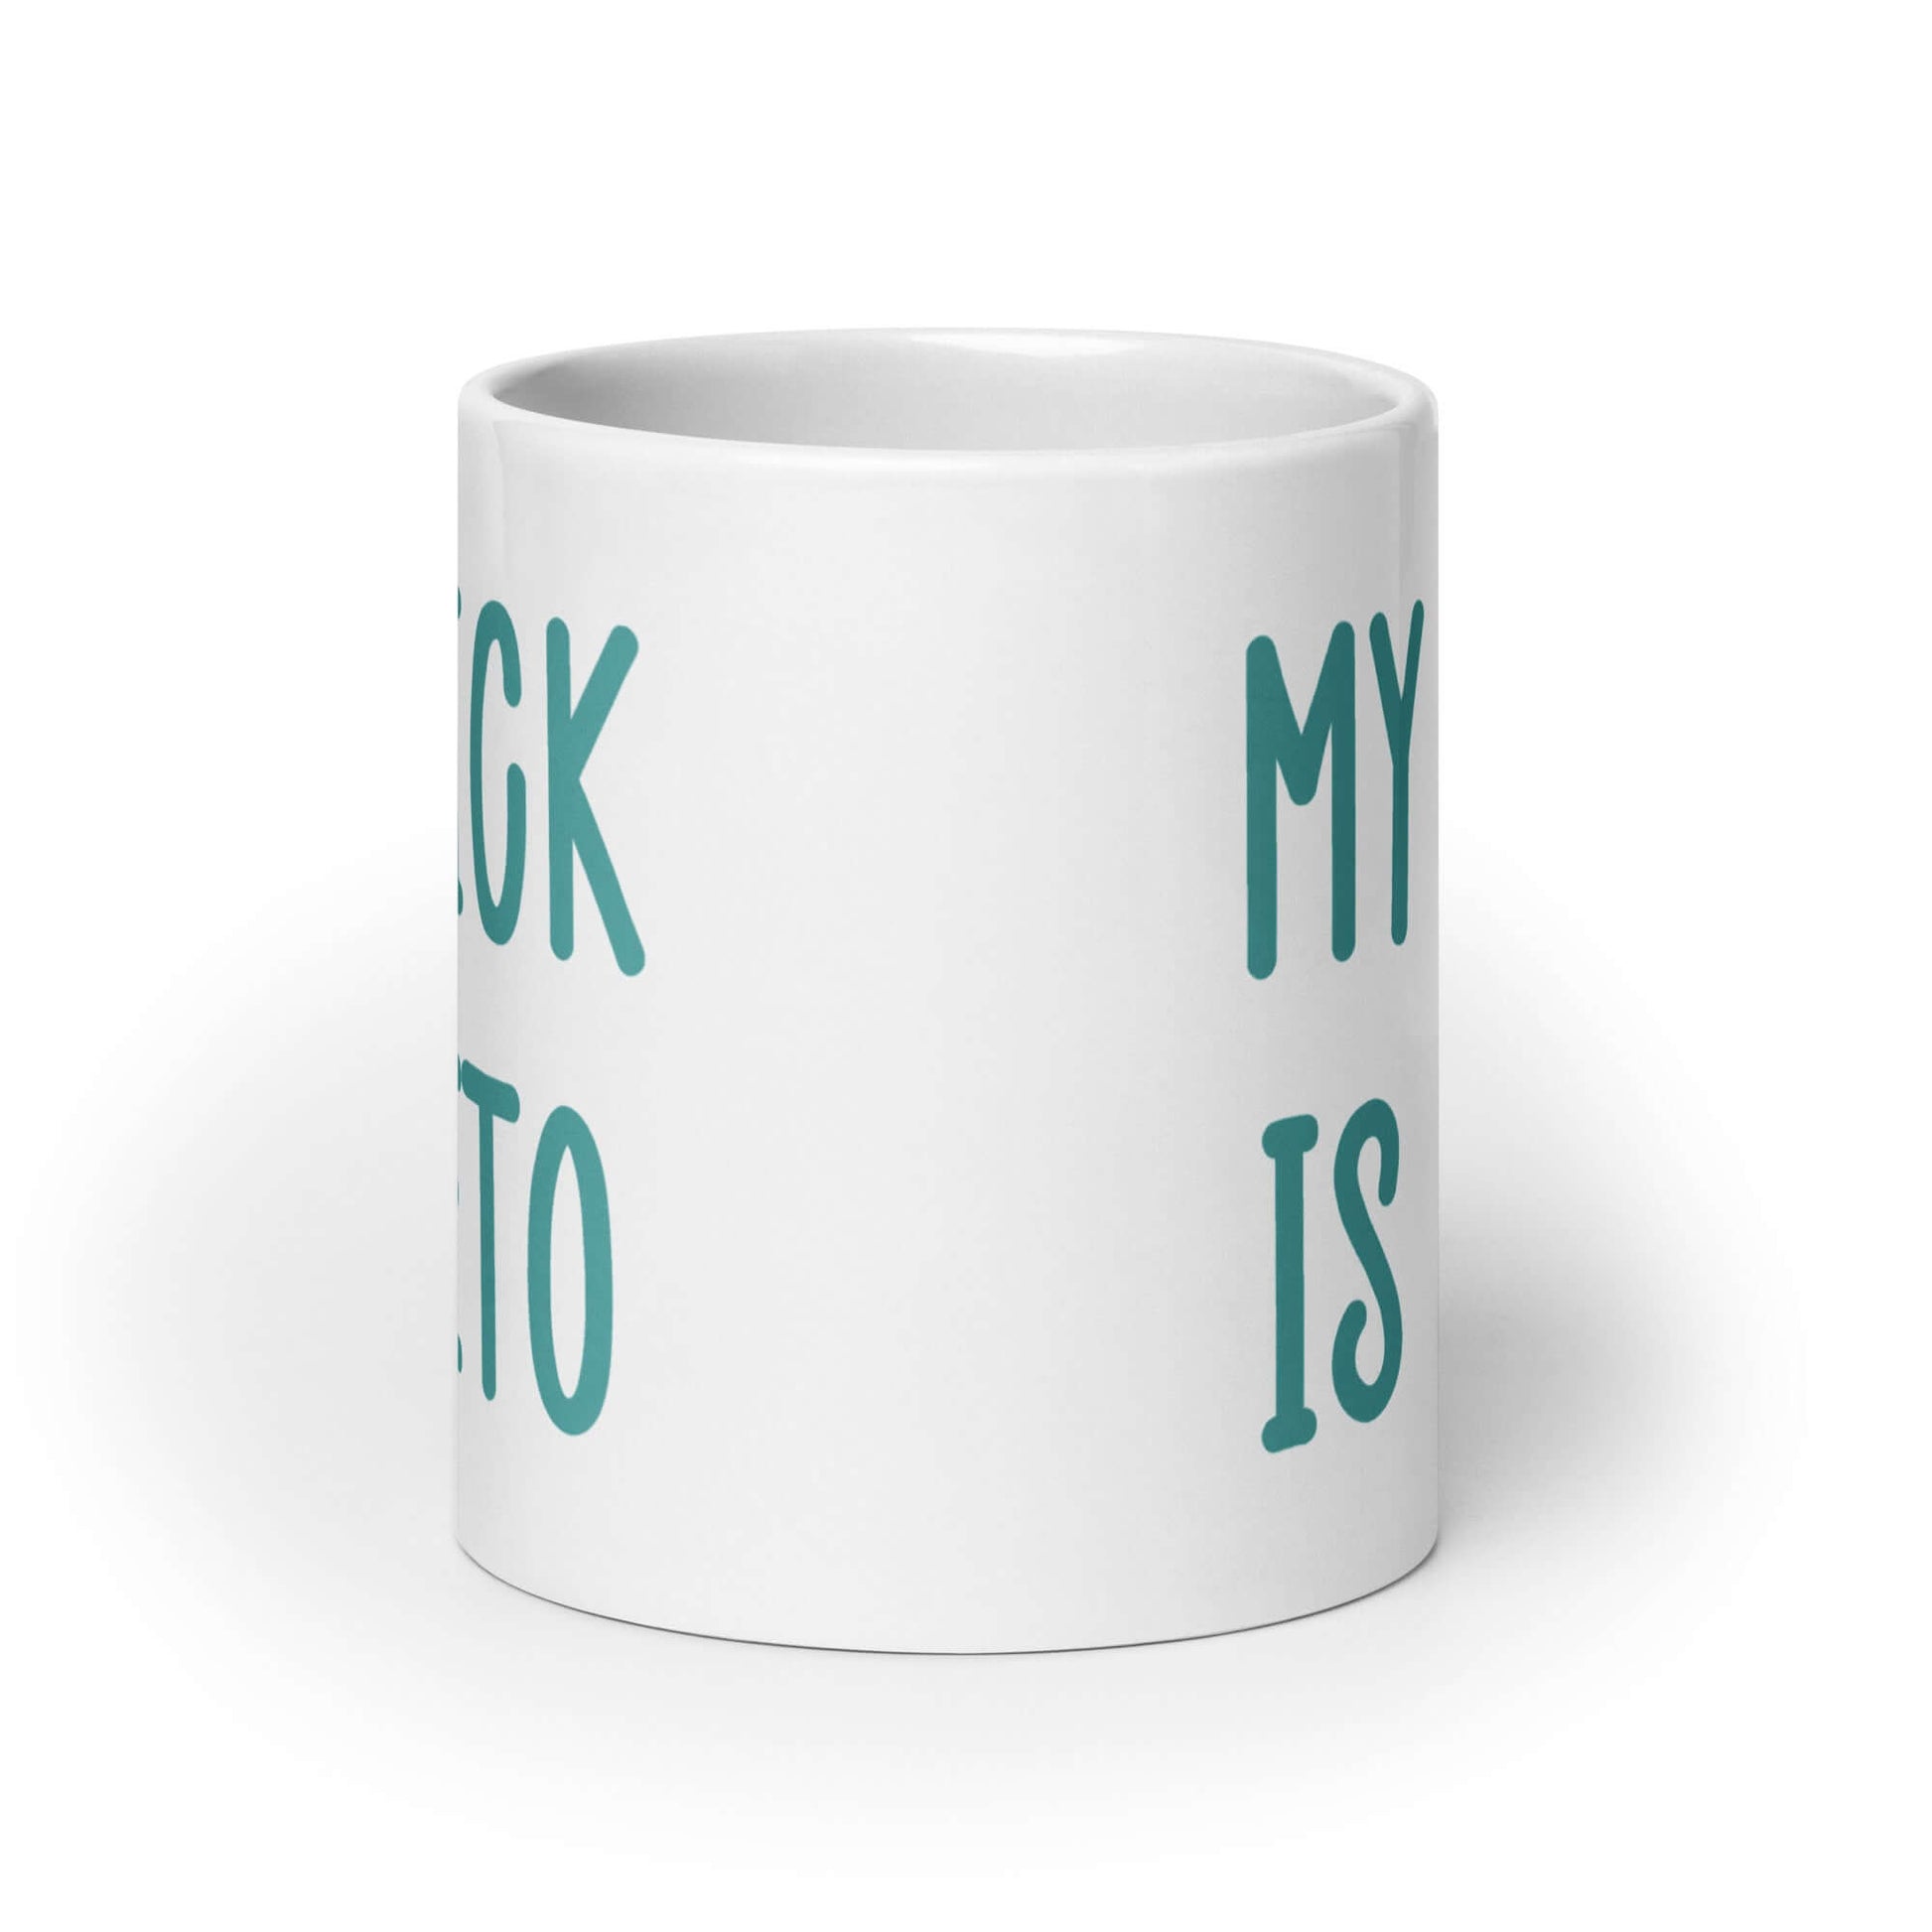 White ceramic coffee mug with the phrase My dick is keto printed on both sides in turquoise font.